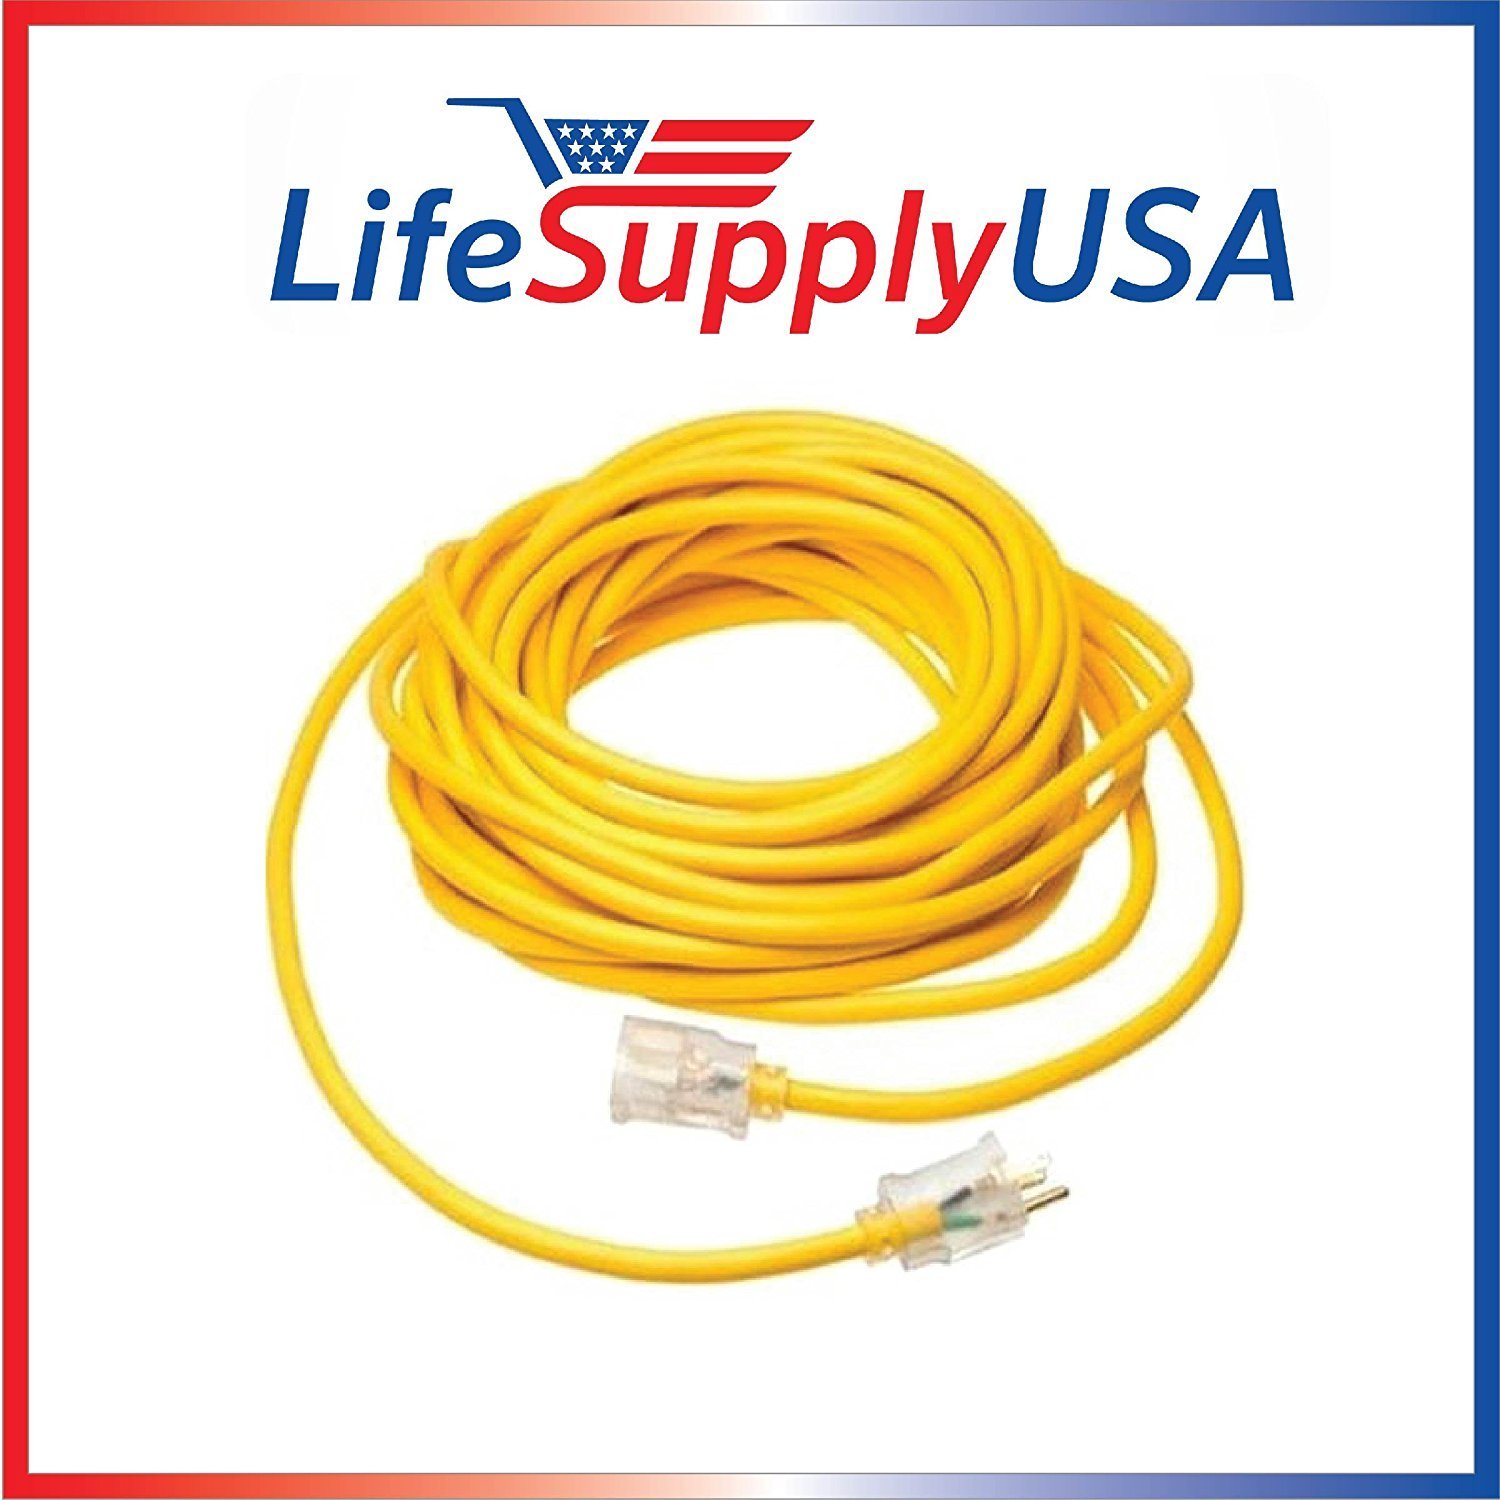 75 ft. 12/3 SJTW Lighted End Heavy Duty Extension Cord (75 ft.)